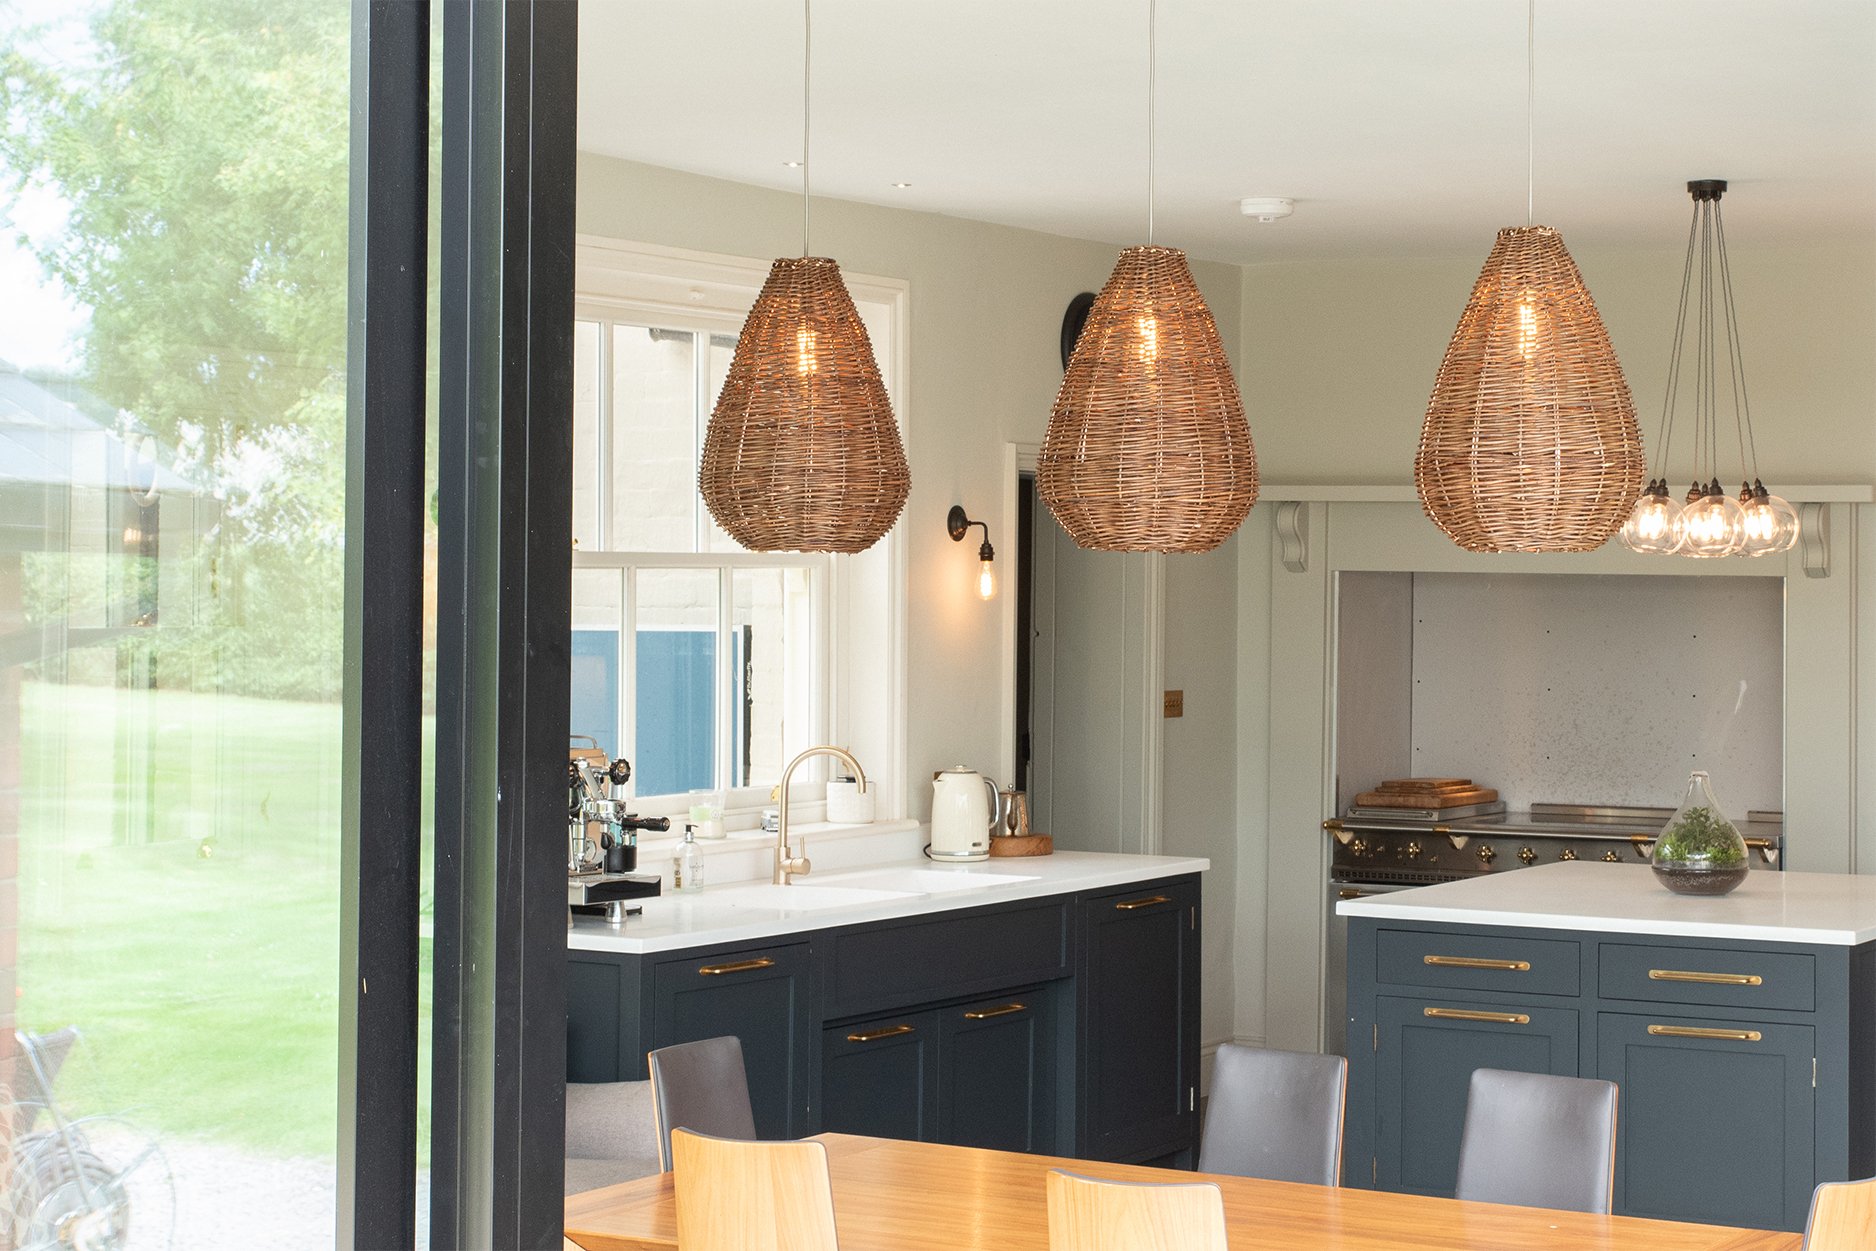 Three hand-woven wicker shades crafted from willow adding a perfect earthy touch to the kitchen. Part of the Wicker Lighting Collection, these shades bring natural elegance to any setting.